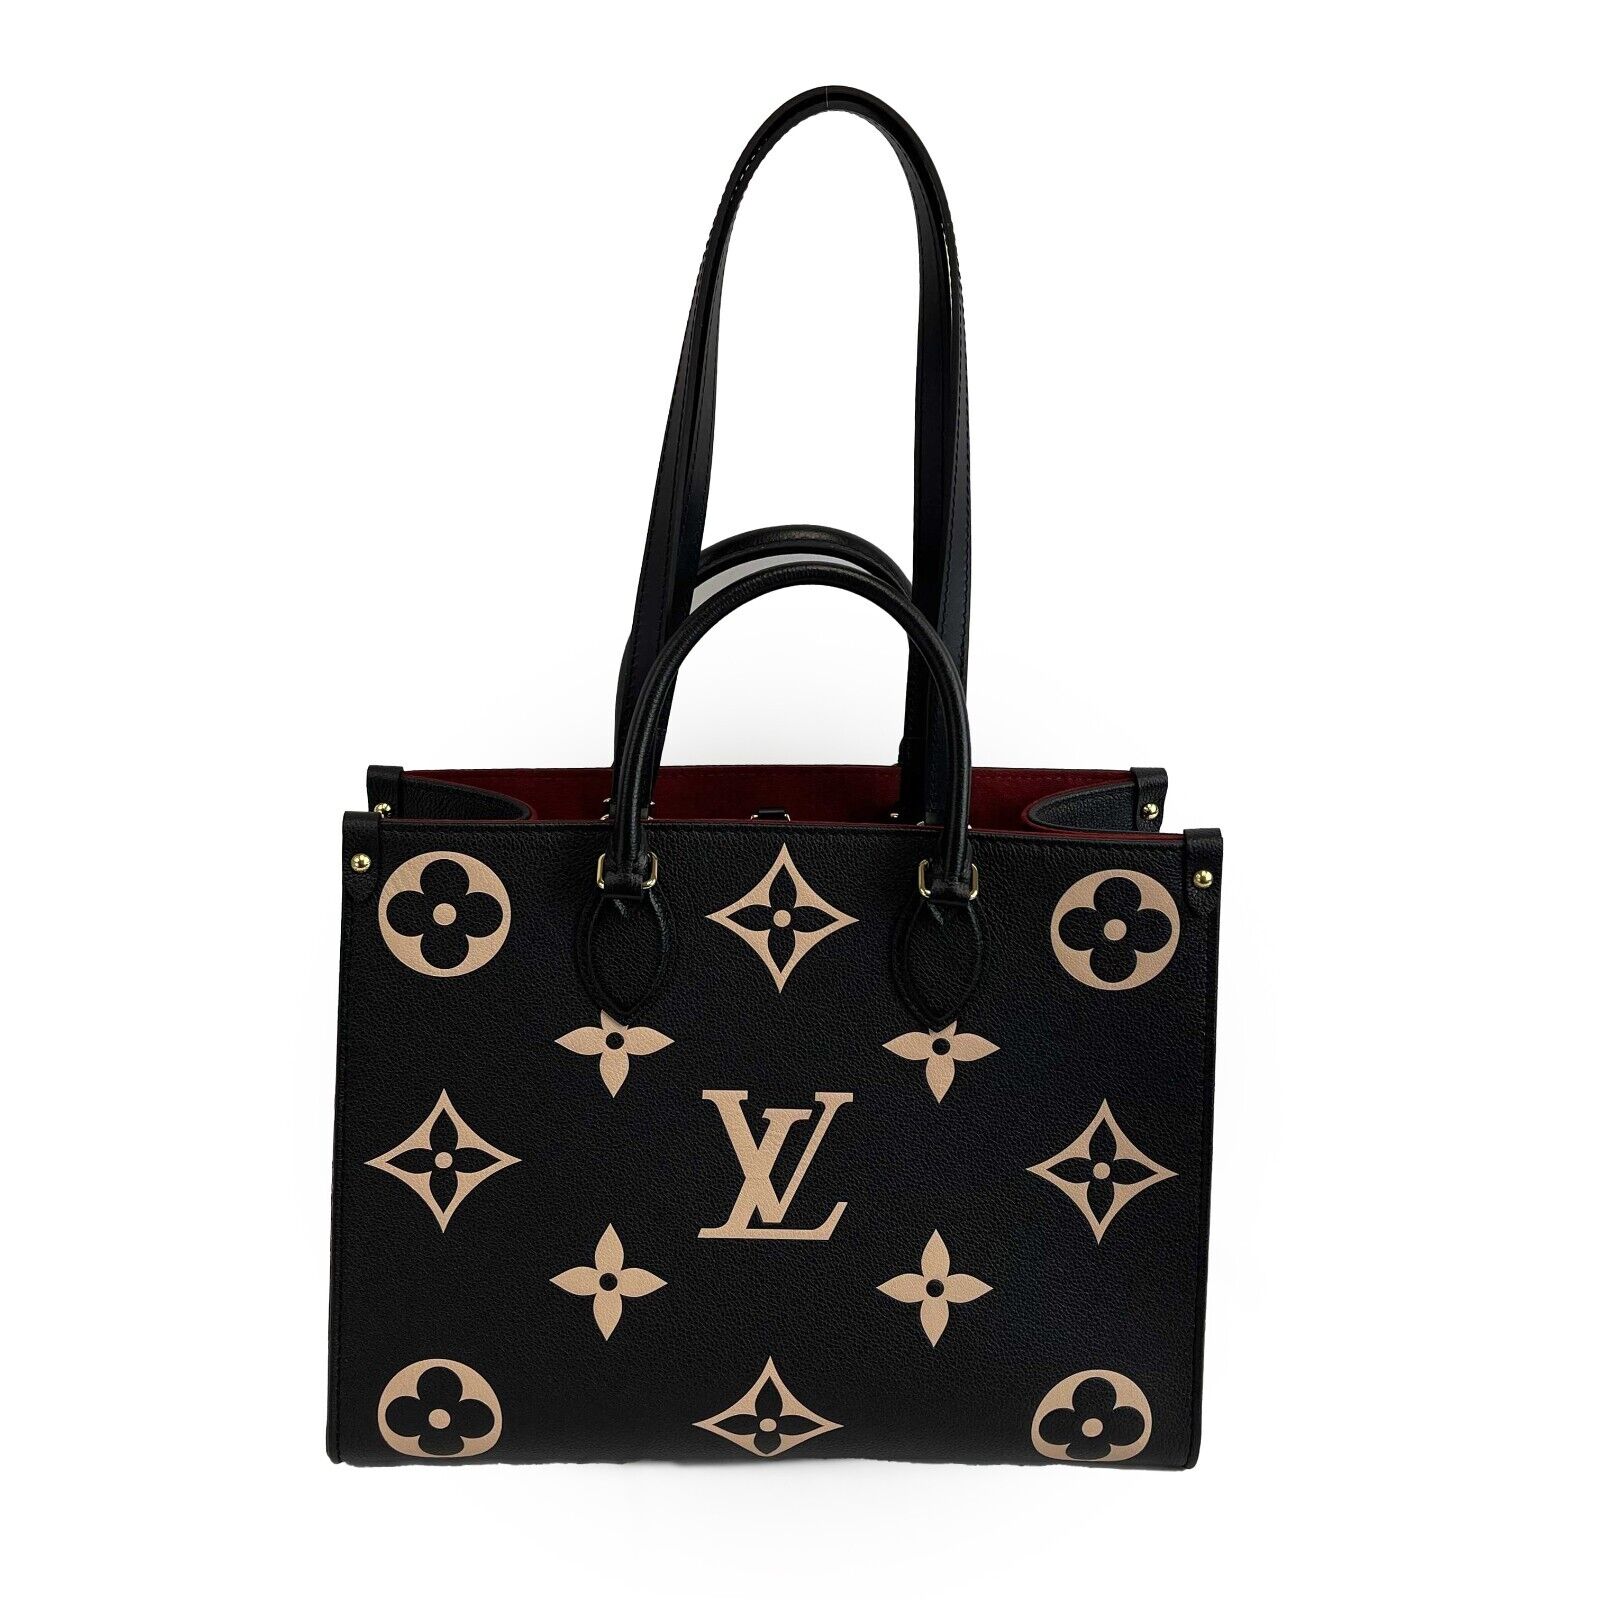 LOUIS VUITTON - NEW - On the go MM - Black/Beige Embossed Leather Tote